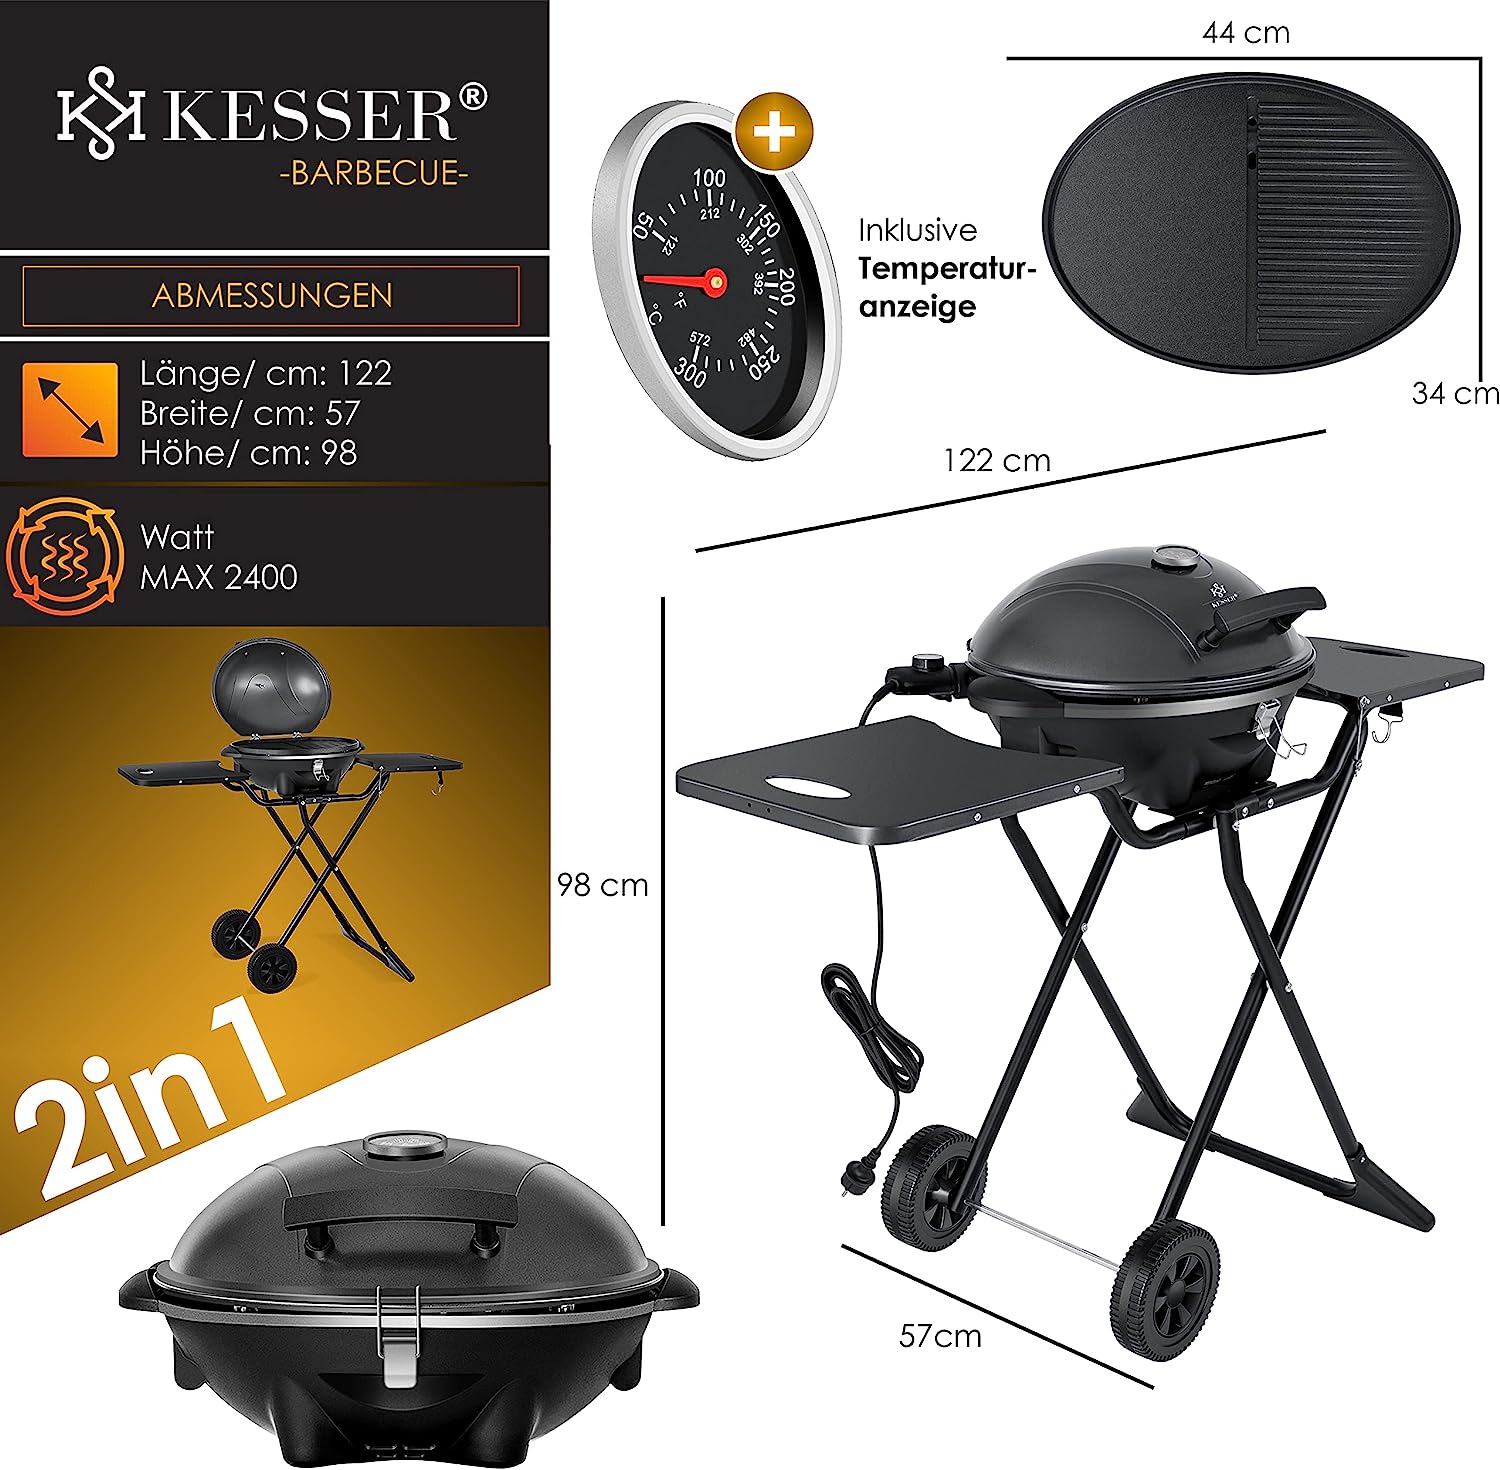 KESSER® Electric Grill 2-in-1 Table Grill with Lid and Stand Max. 2400 Watt Foldable Thermometer Non-Stick Coating Grill Plate Storage Tables 2 Wheels Black